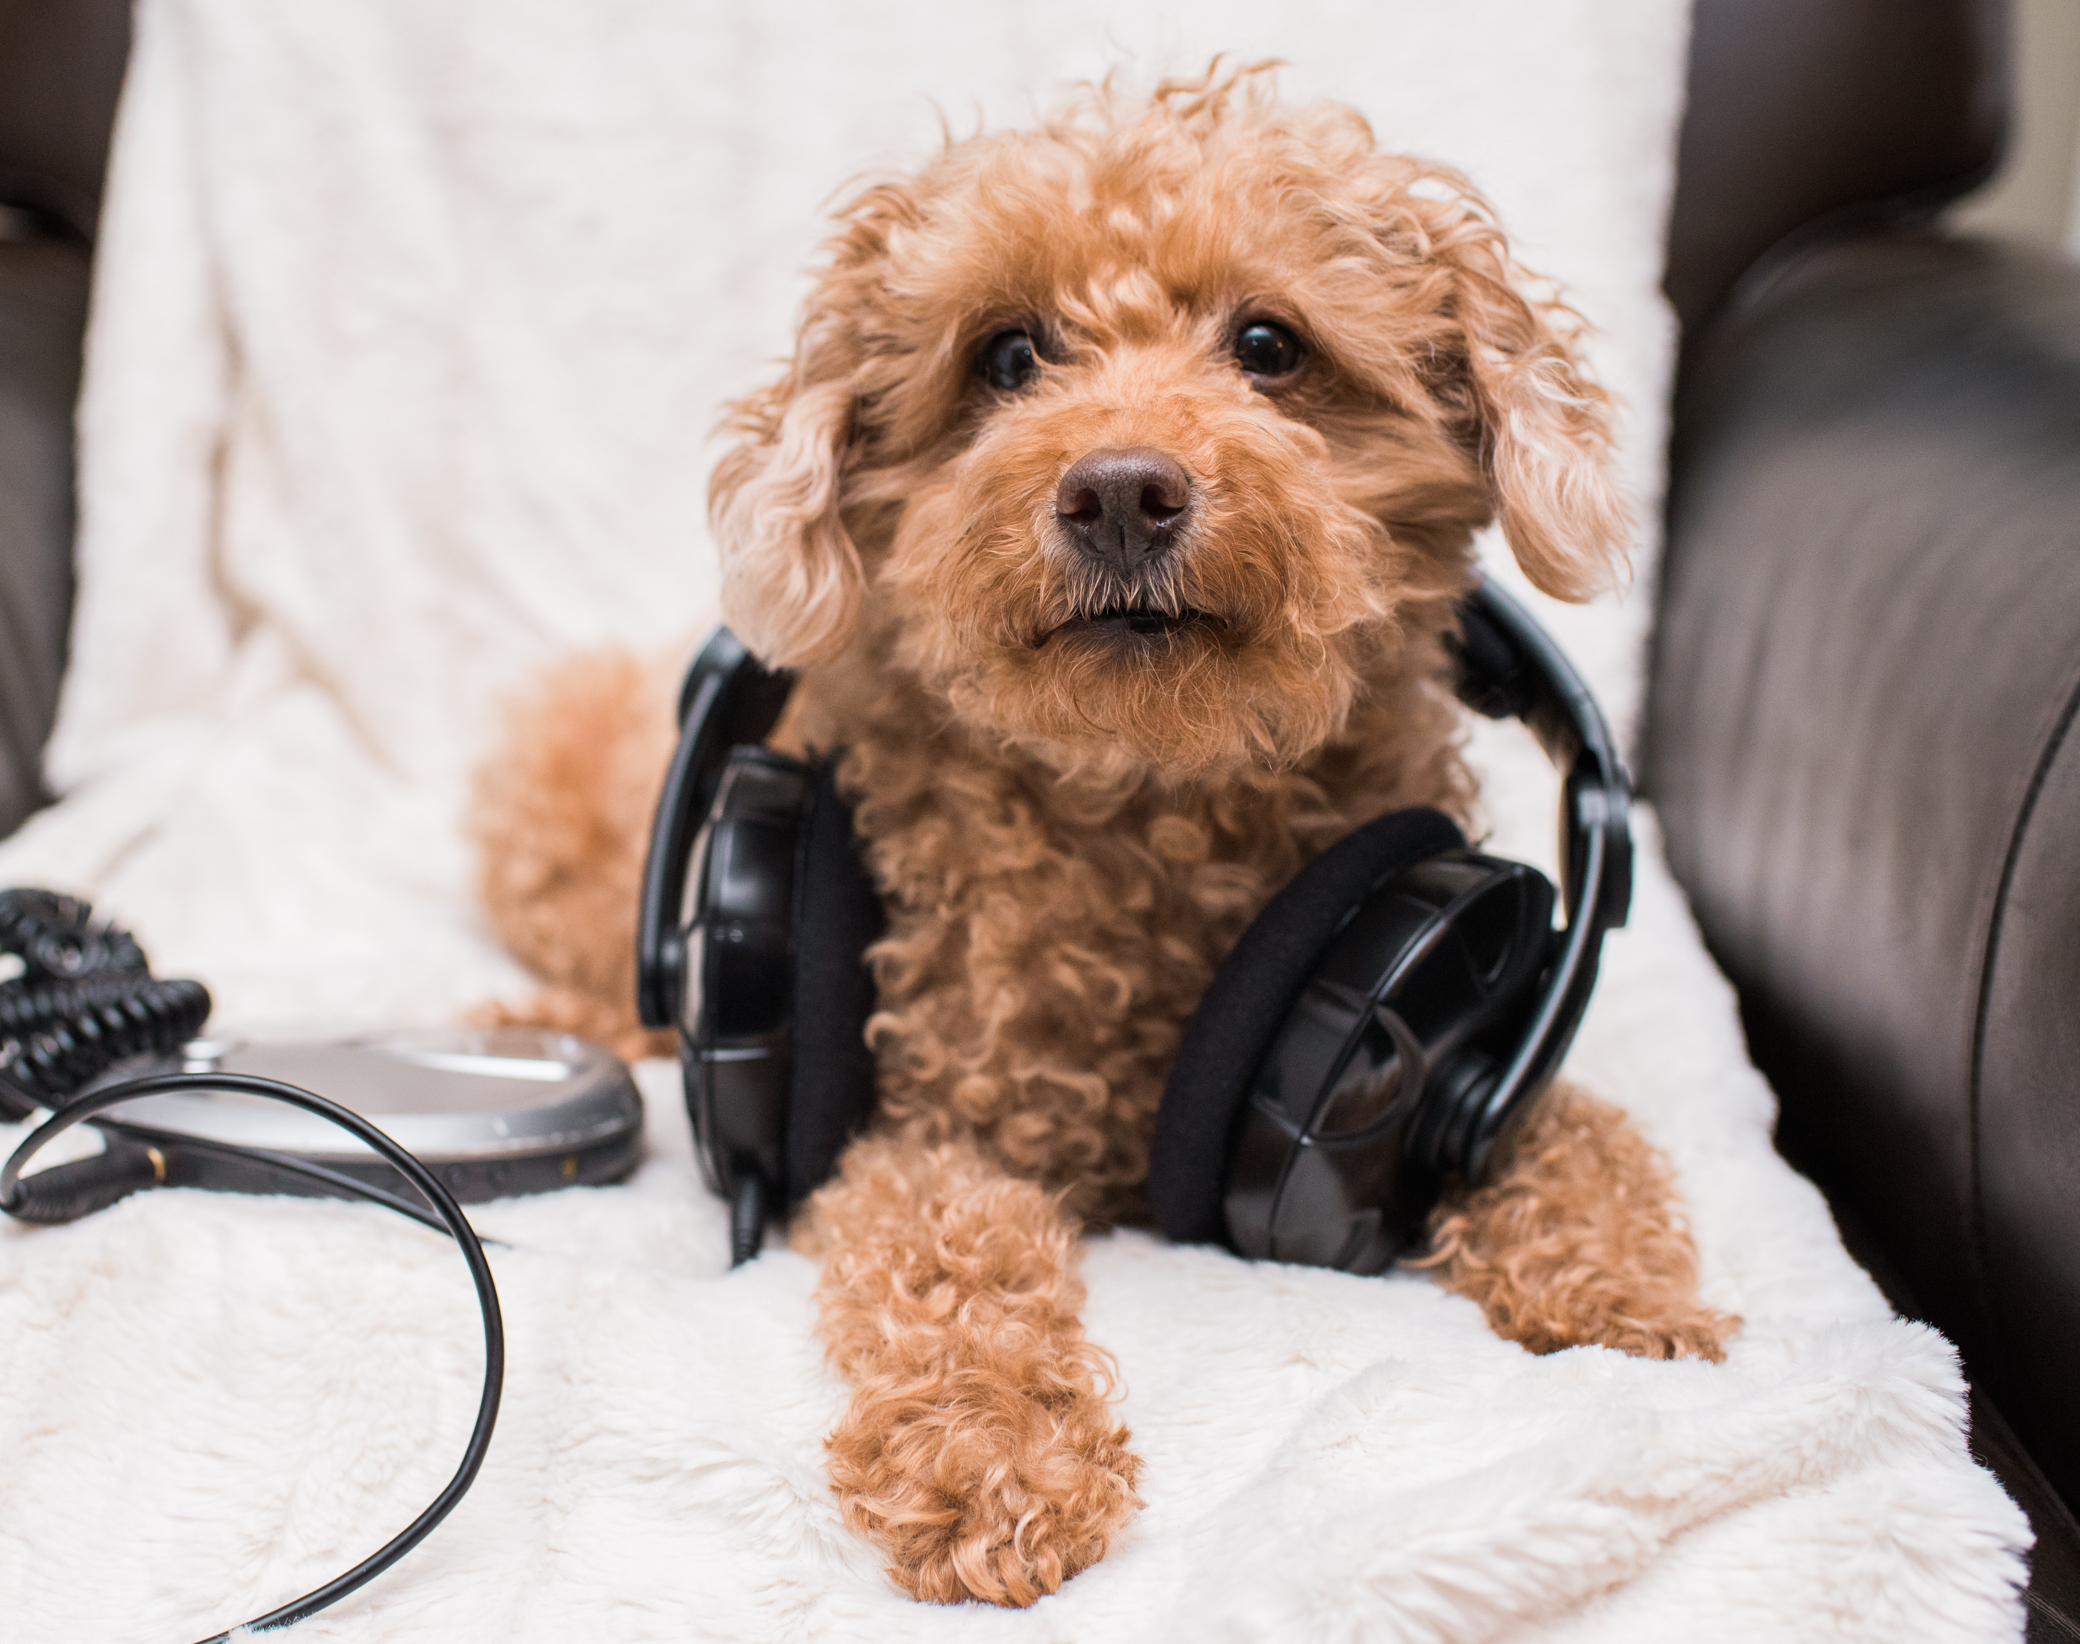 a red toy poodle named Barkley on a chair wearing headphones